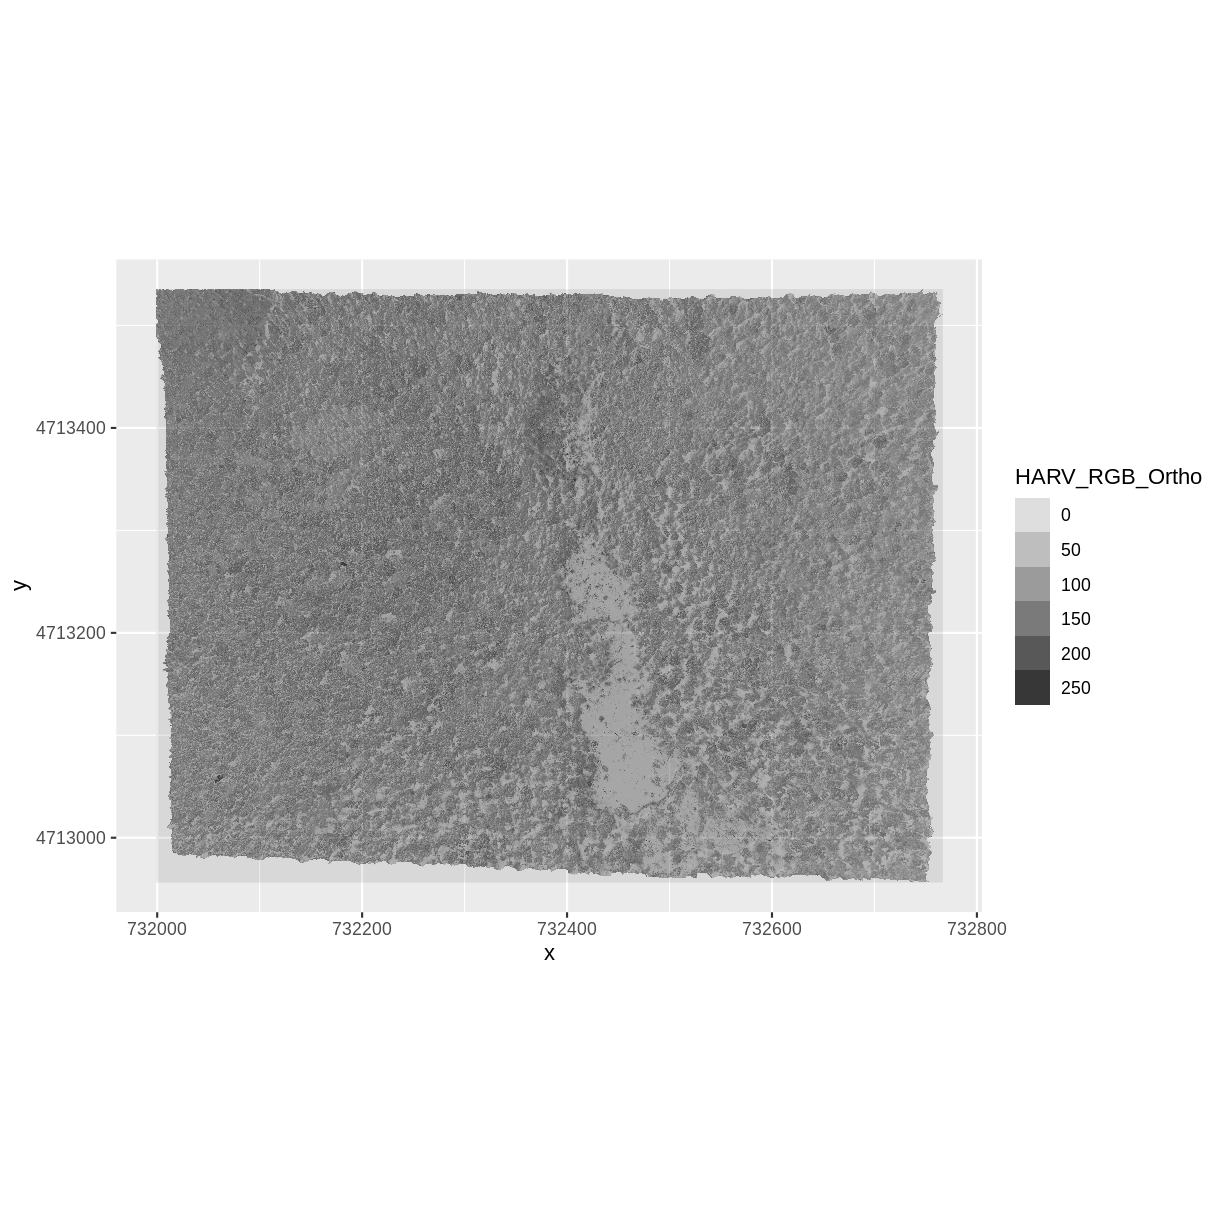 Raster 04: Work With Multi-Band Rasters - Image Data in R, NSF NEON